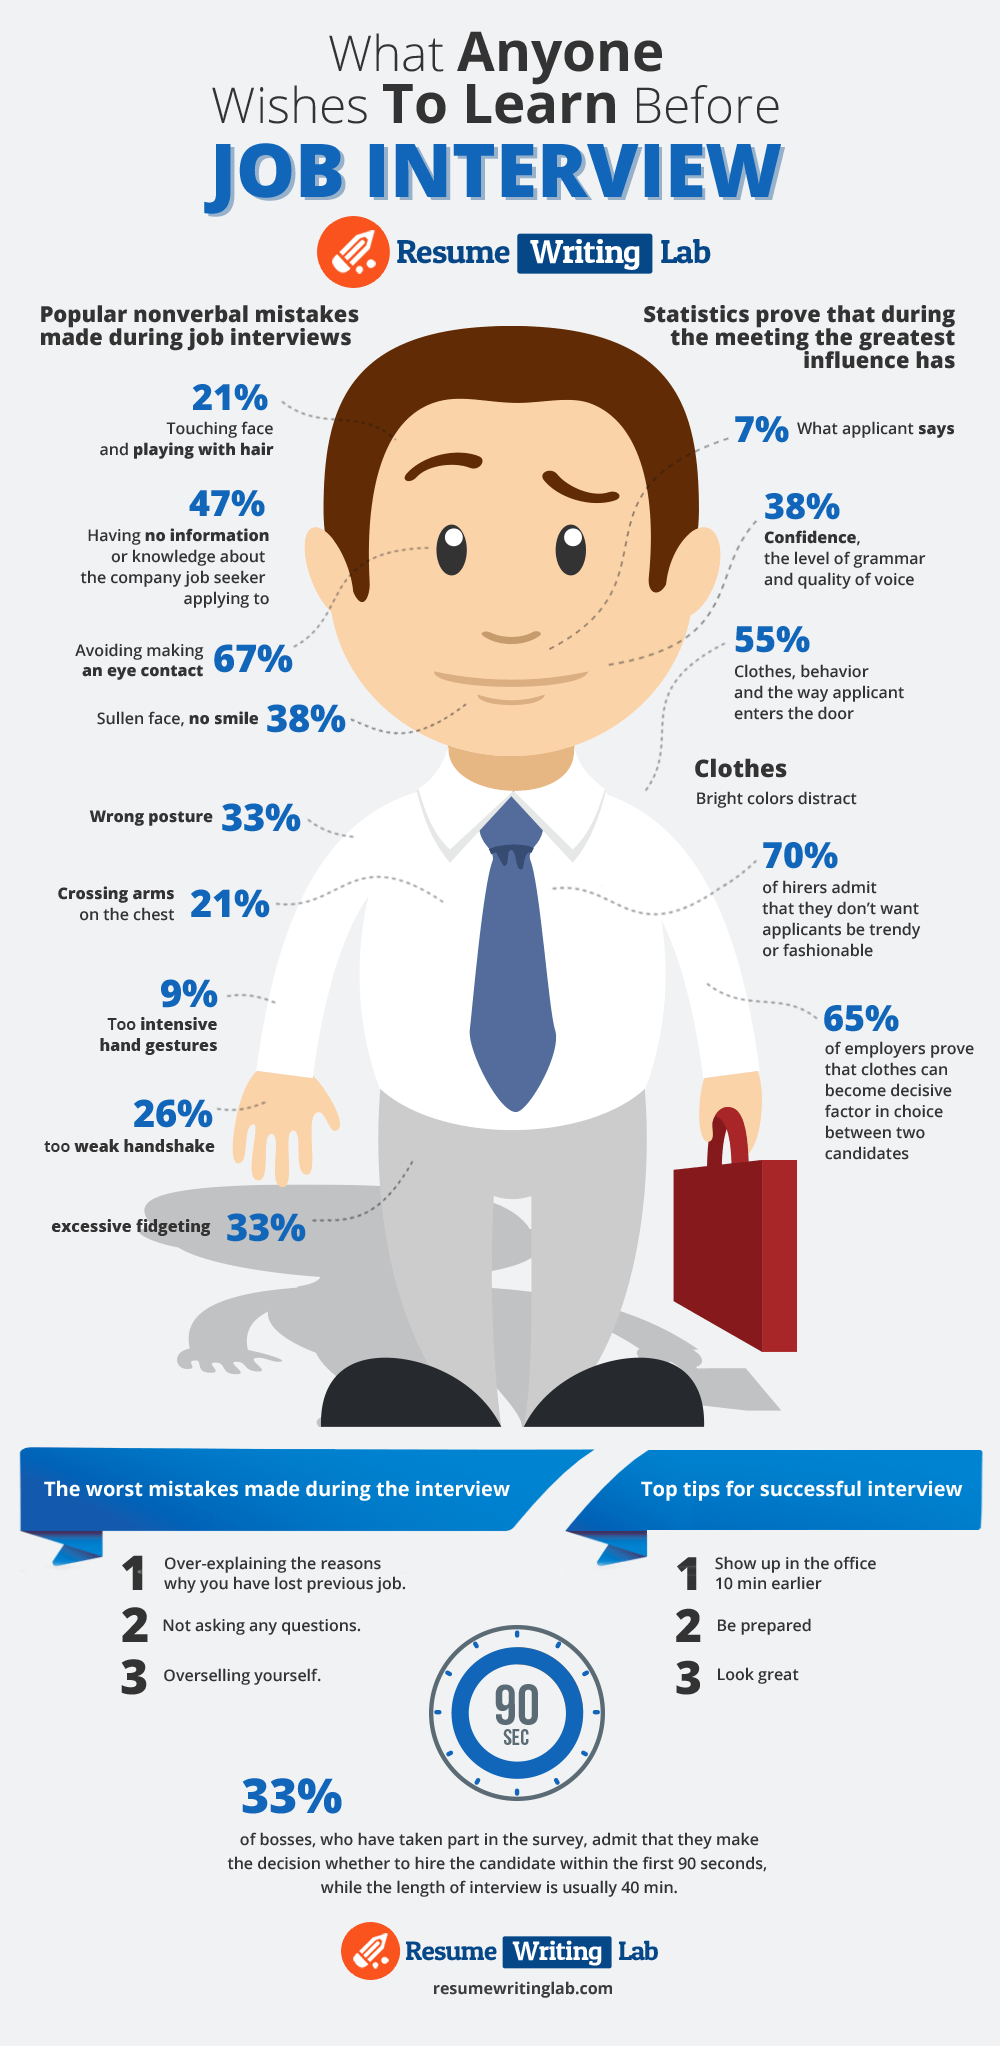 What you need to prepare for a job interview